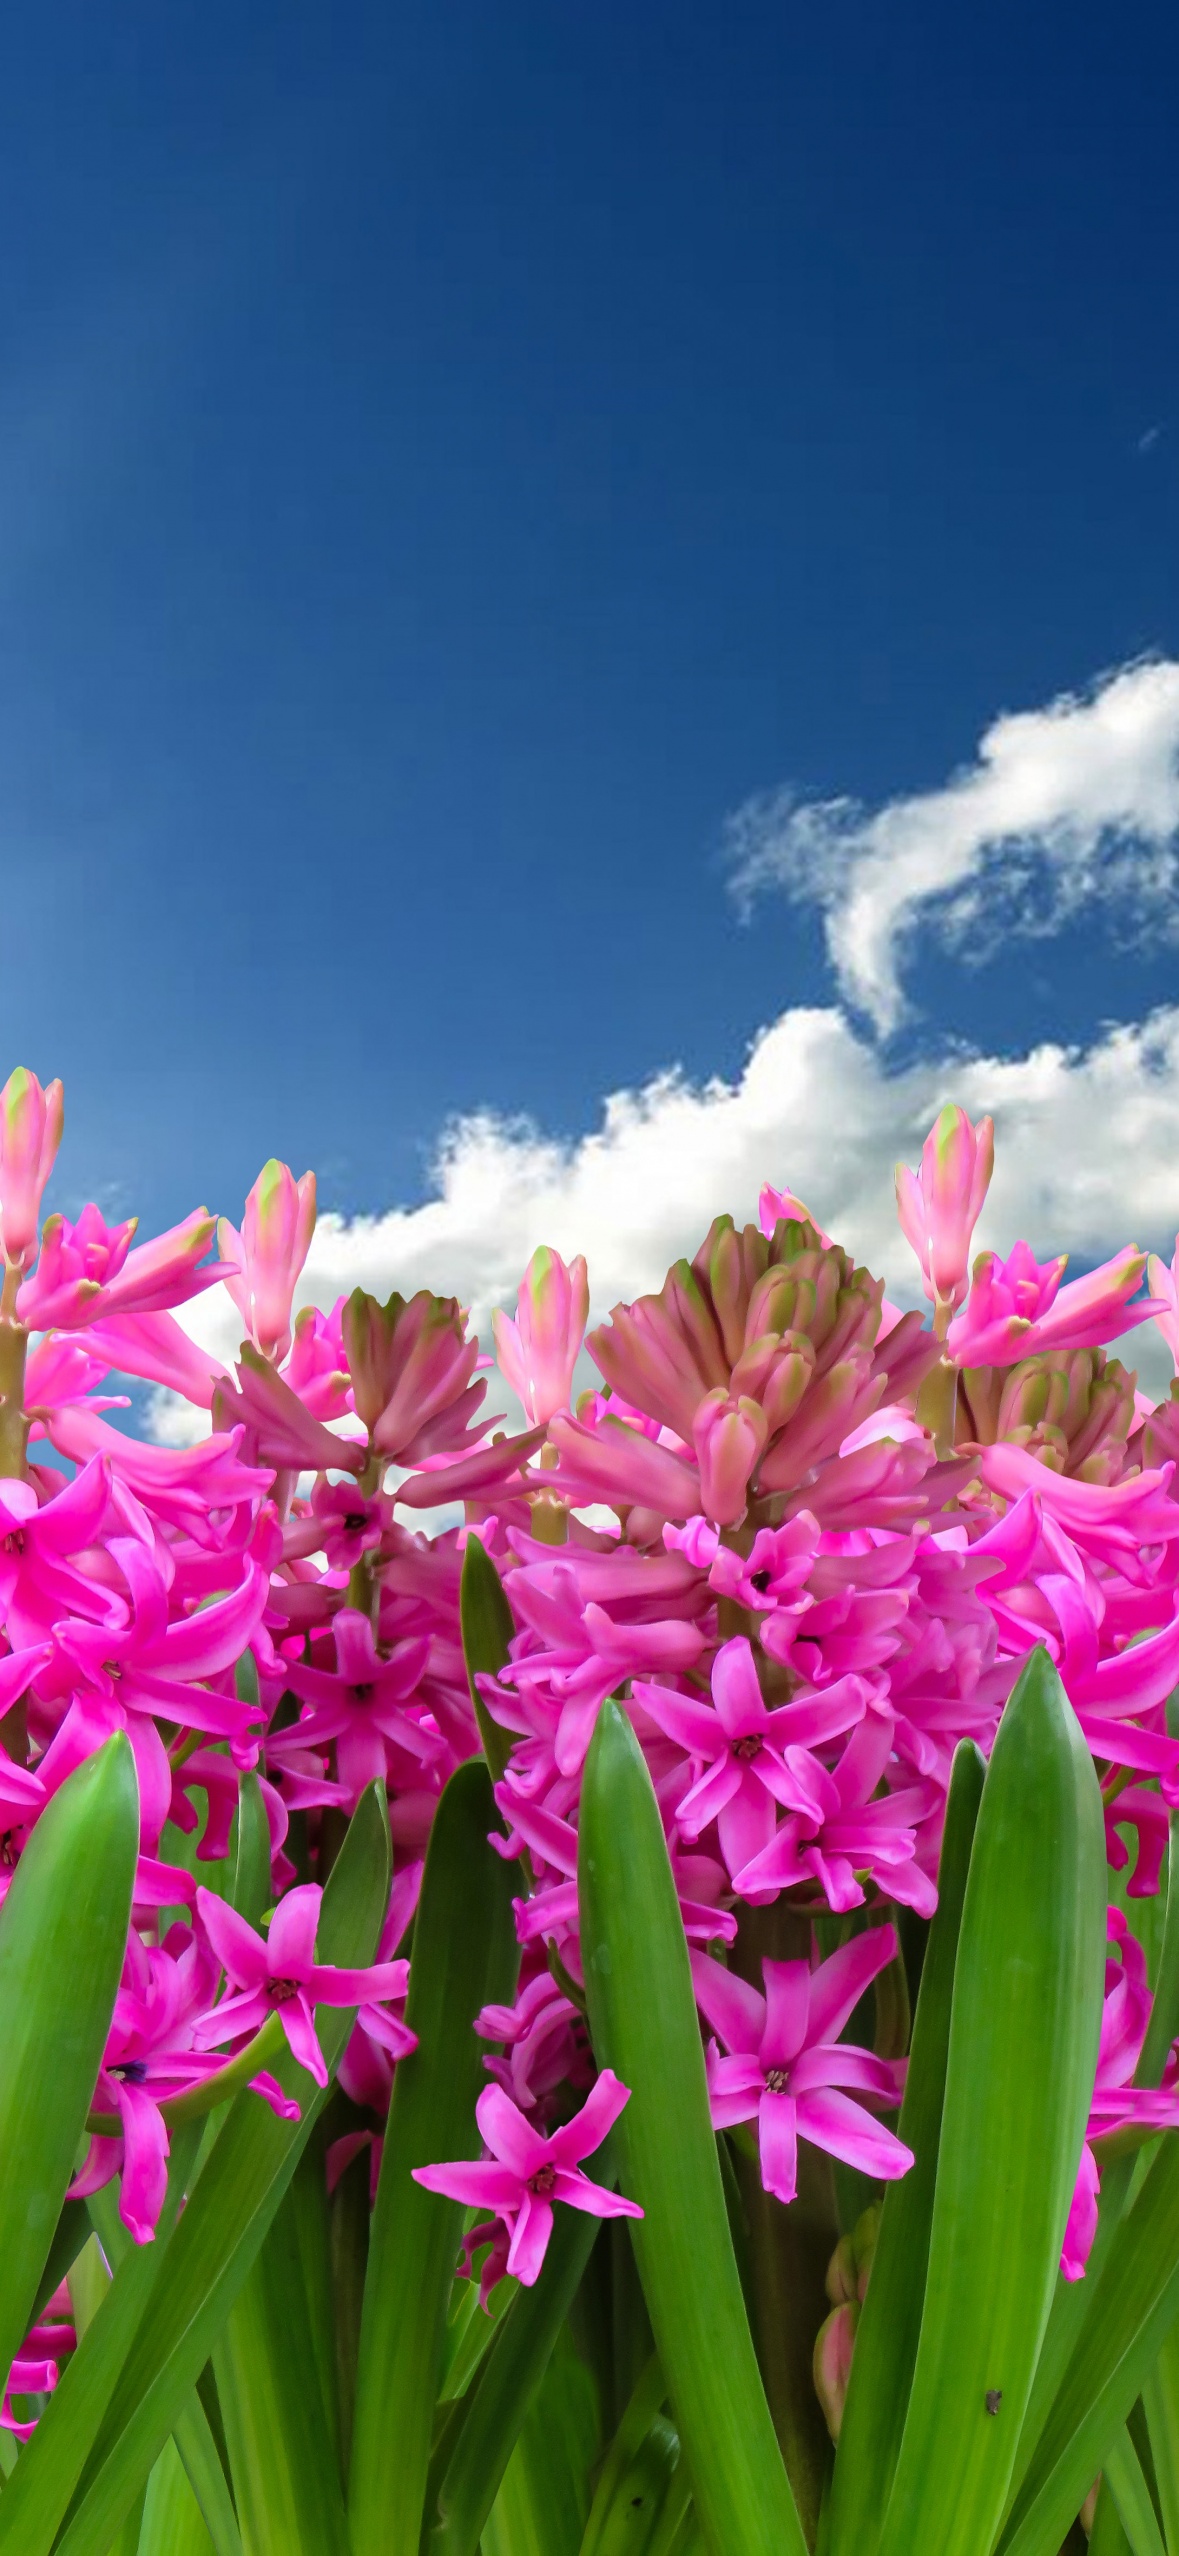 Hyacinth Stock Photos and Images - 123RF